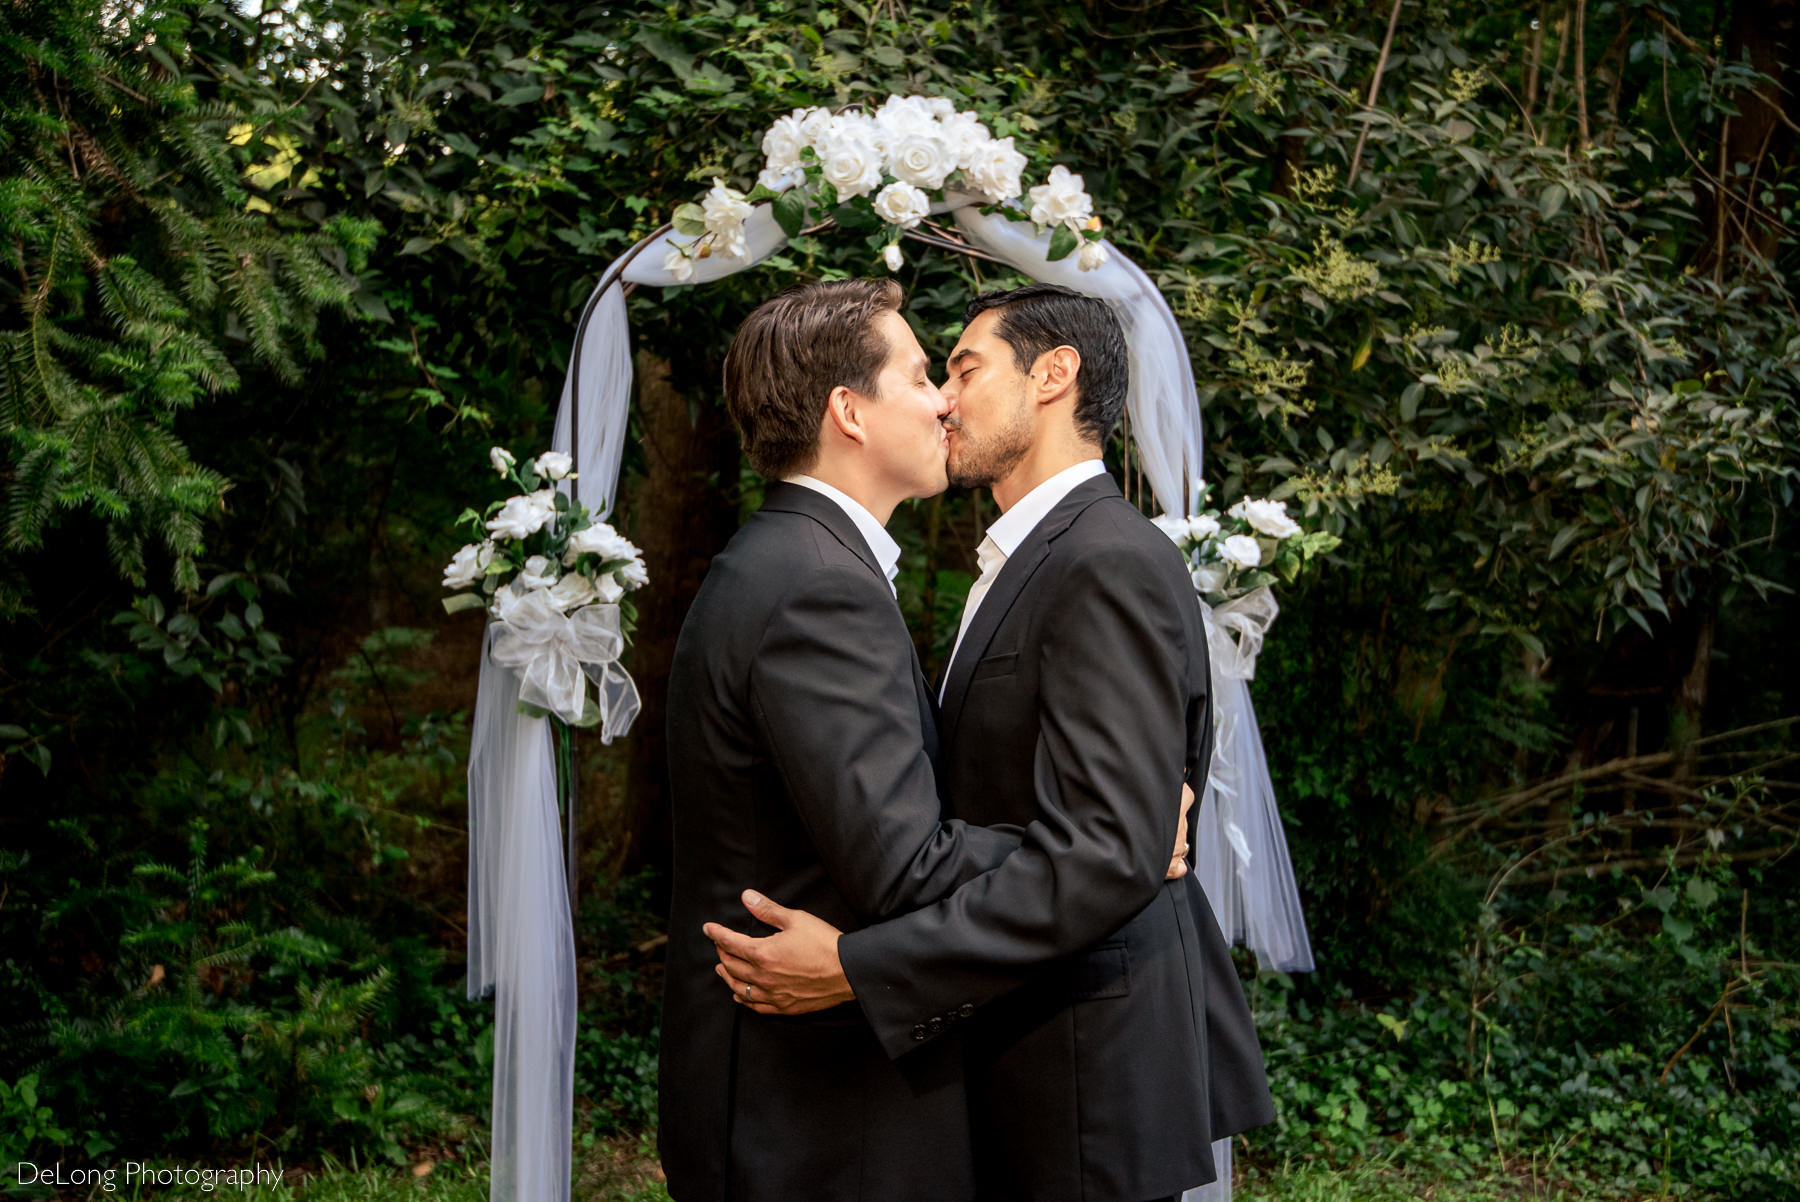 First kiss during same-sex elopement by Charlotte wedding photographers DeLong Photography